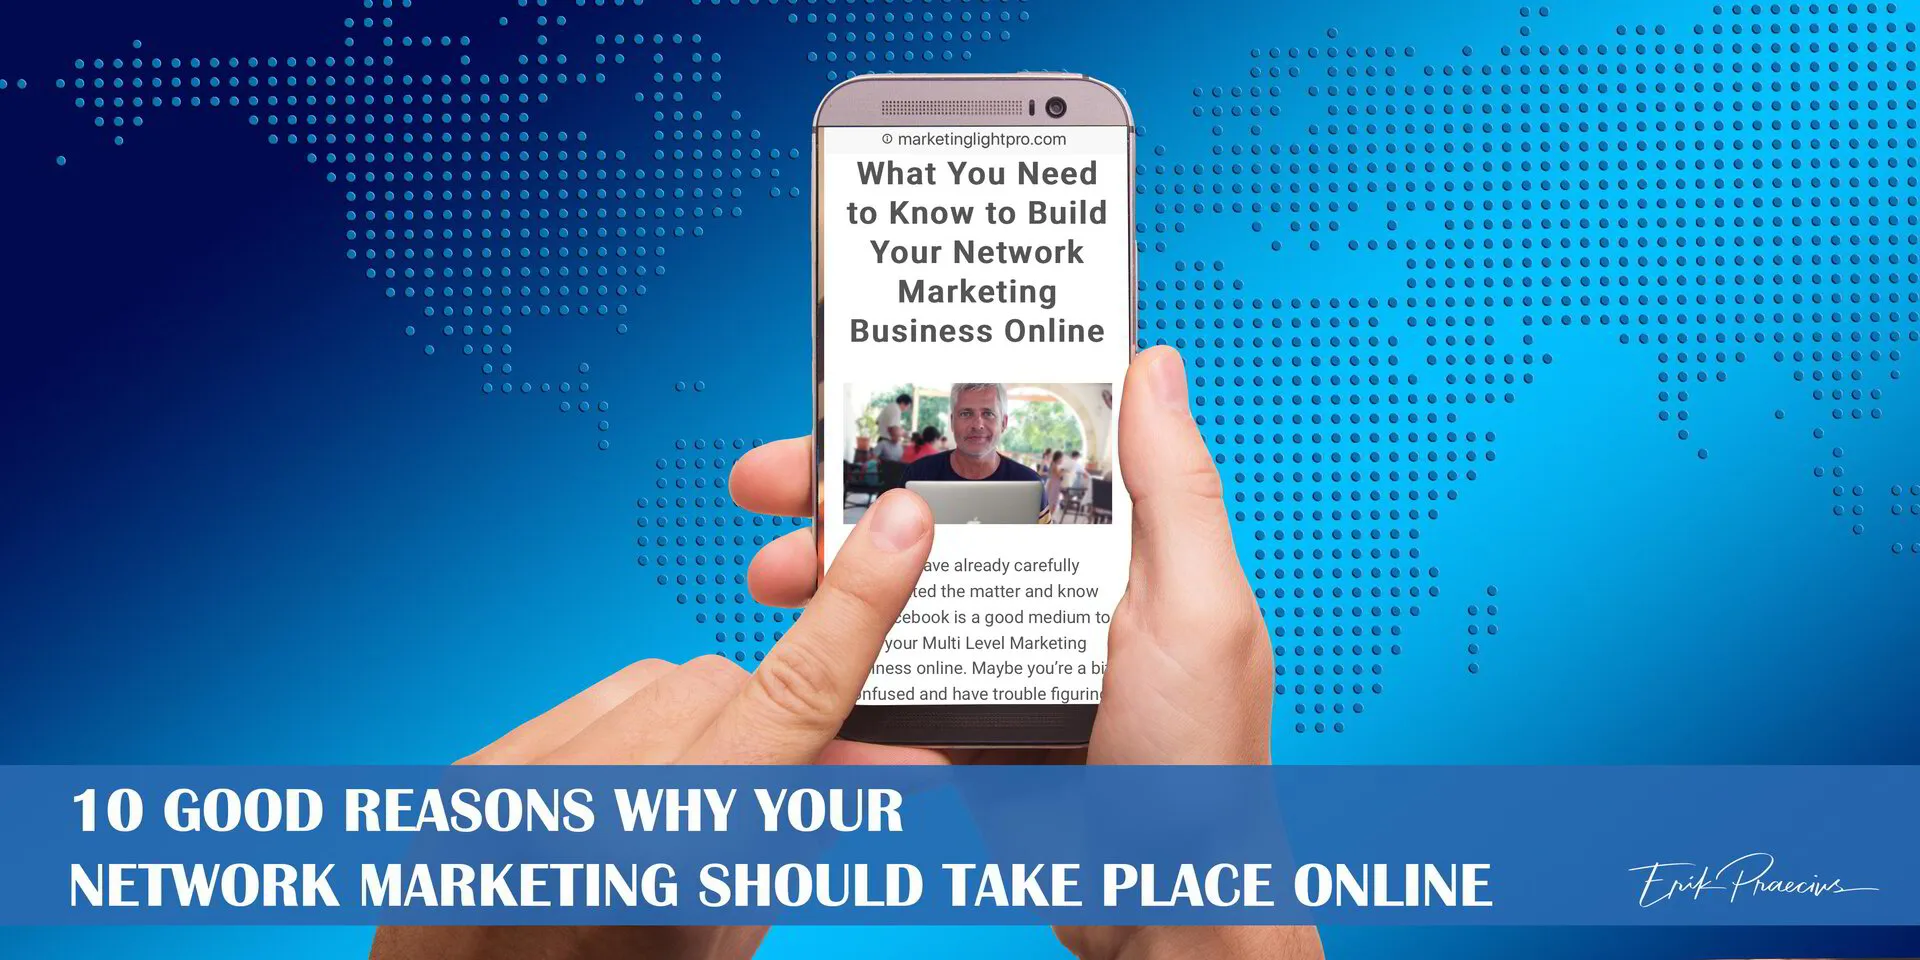 10 Good Reasons Why Your Network Marketing Should Take Place Online